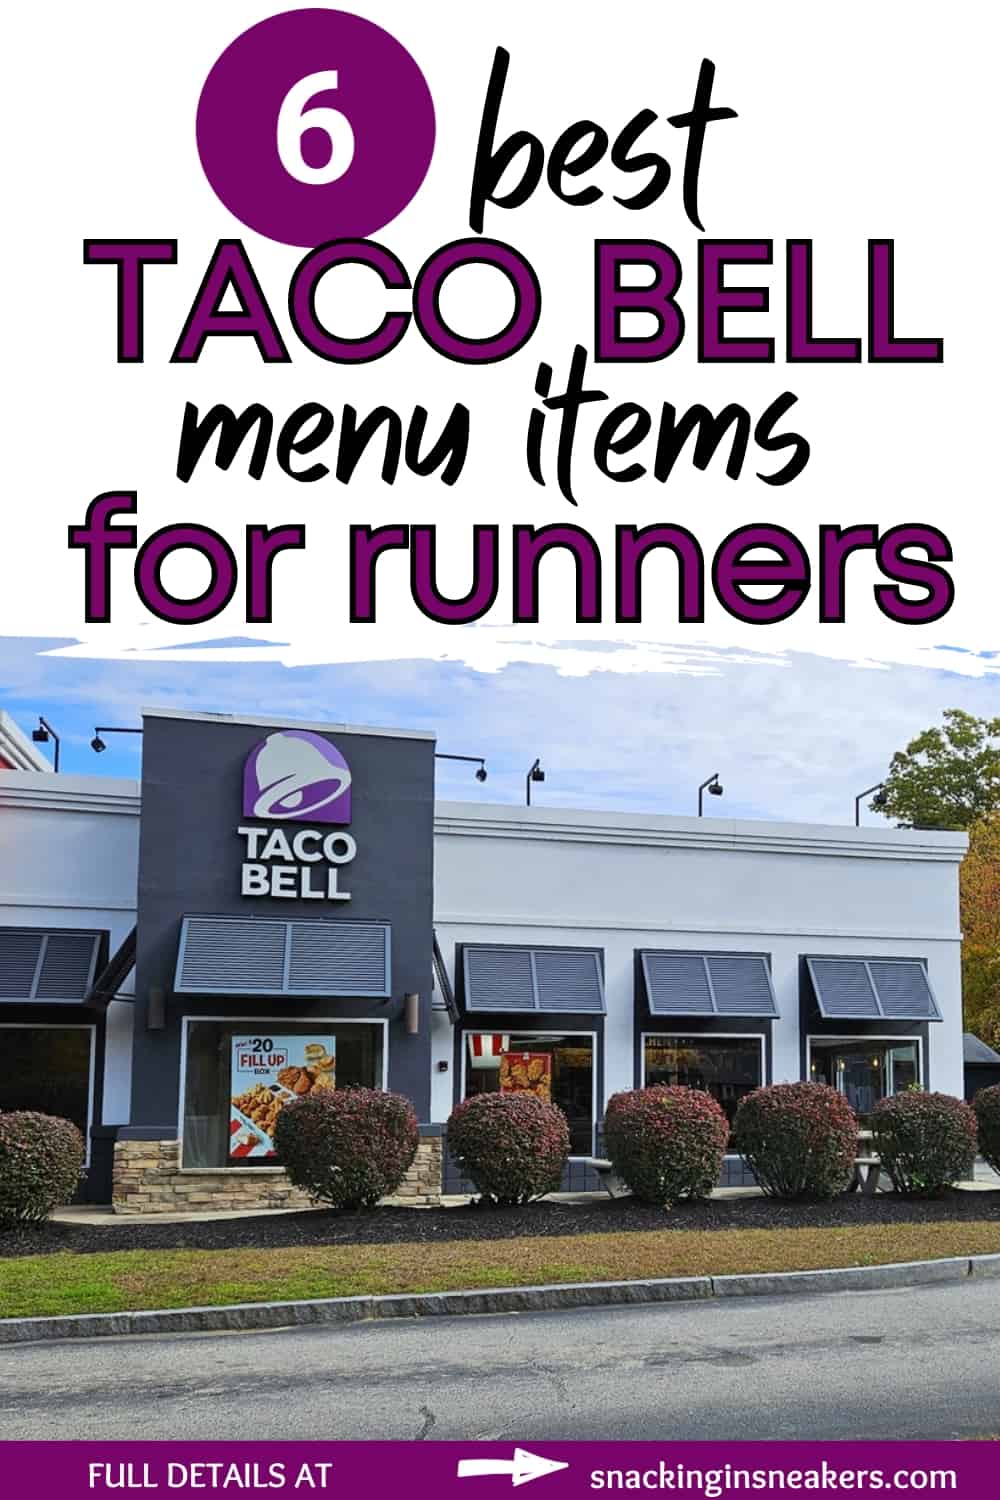 A Taco Bell restaurant with a text overlay that says six best taco bell menu items for runners.